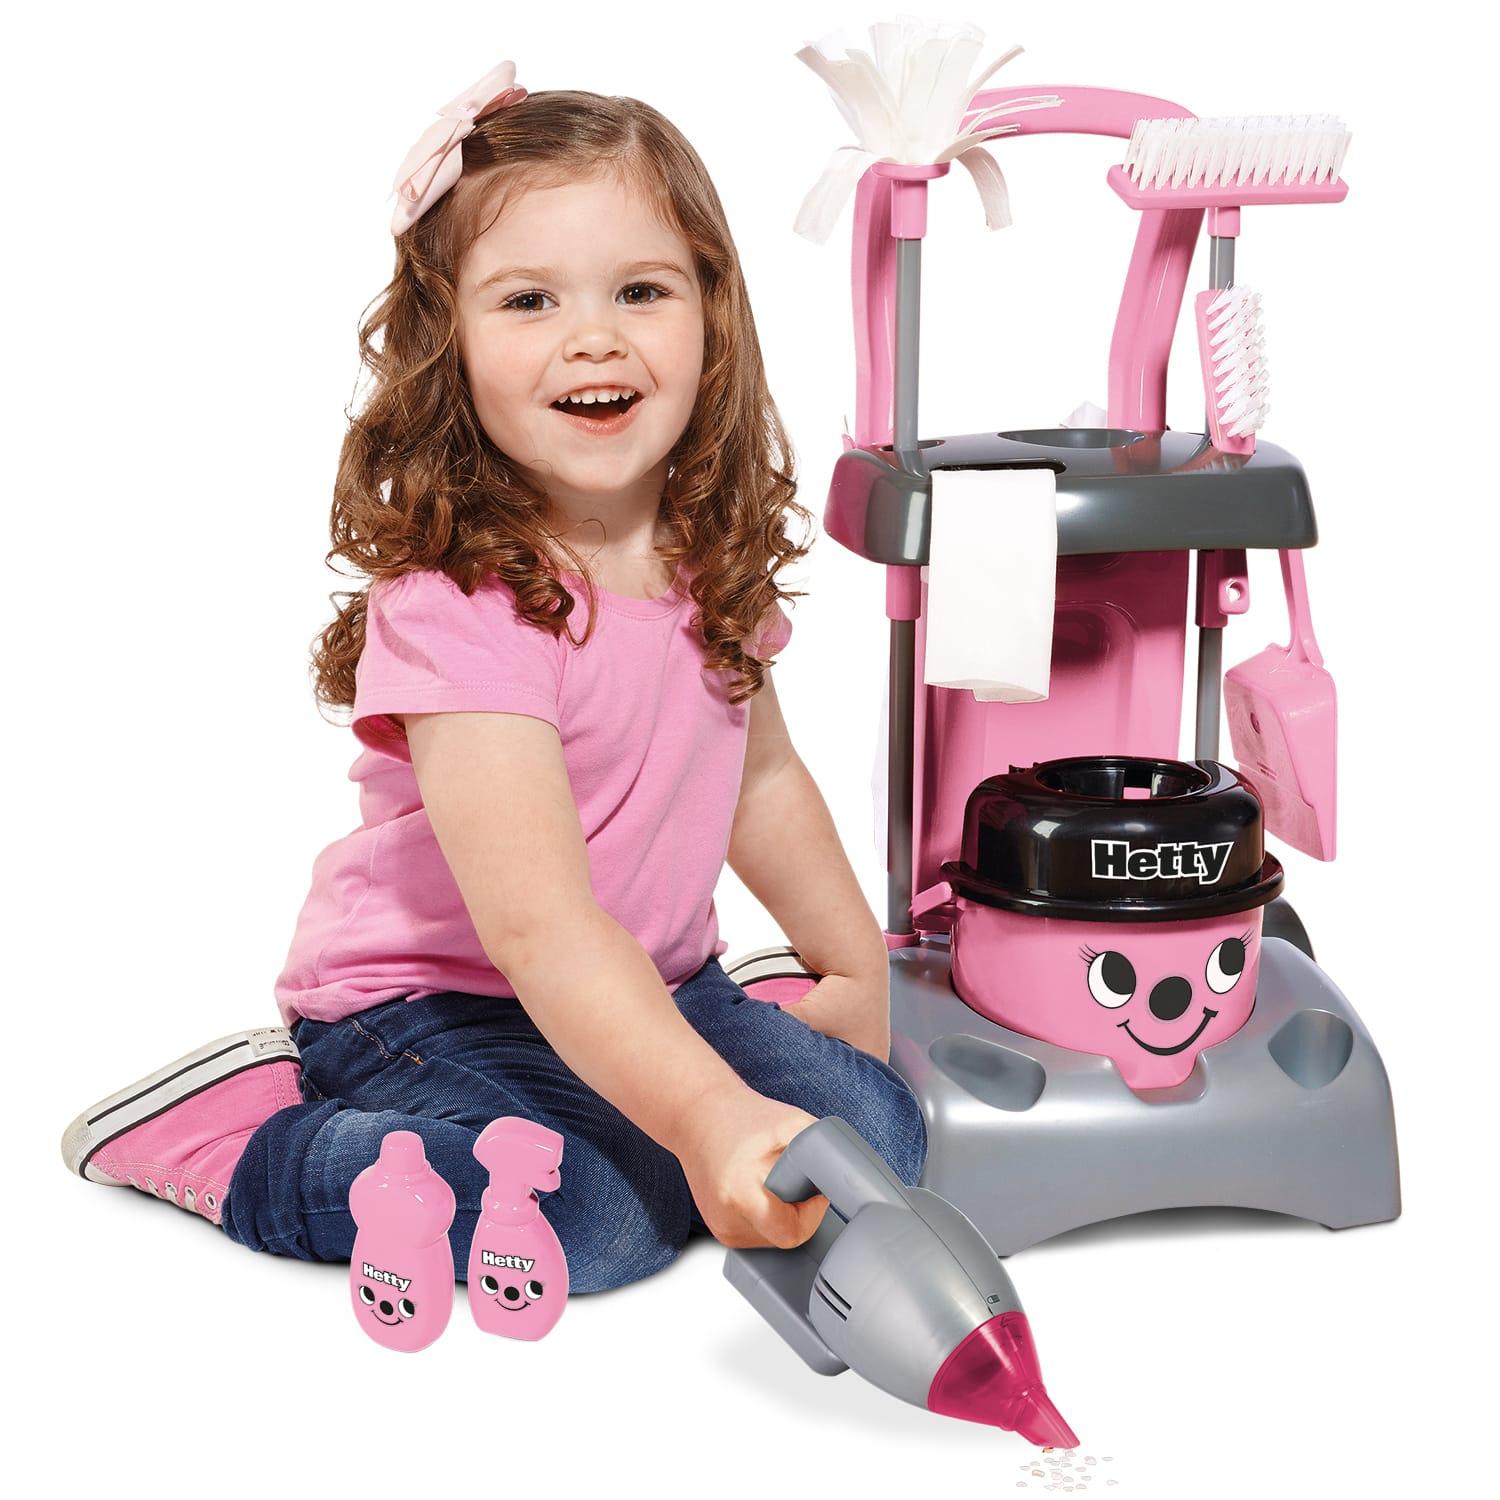 Details about   Henry Hetty Deluxe Cleaning Trolley Vacuum Cleaner Hoover Casdon Kids Fun Role 